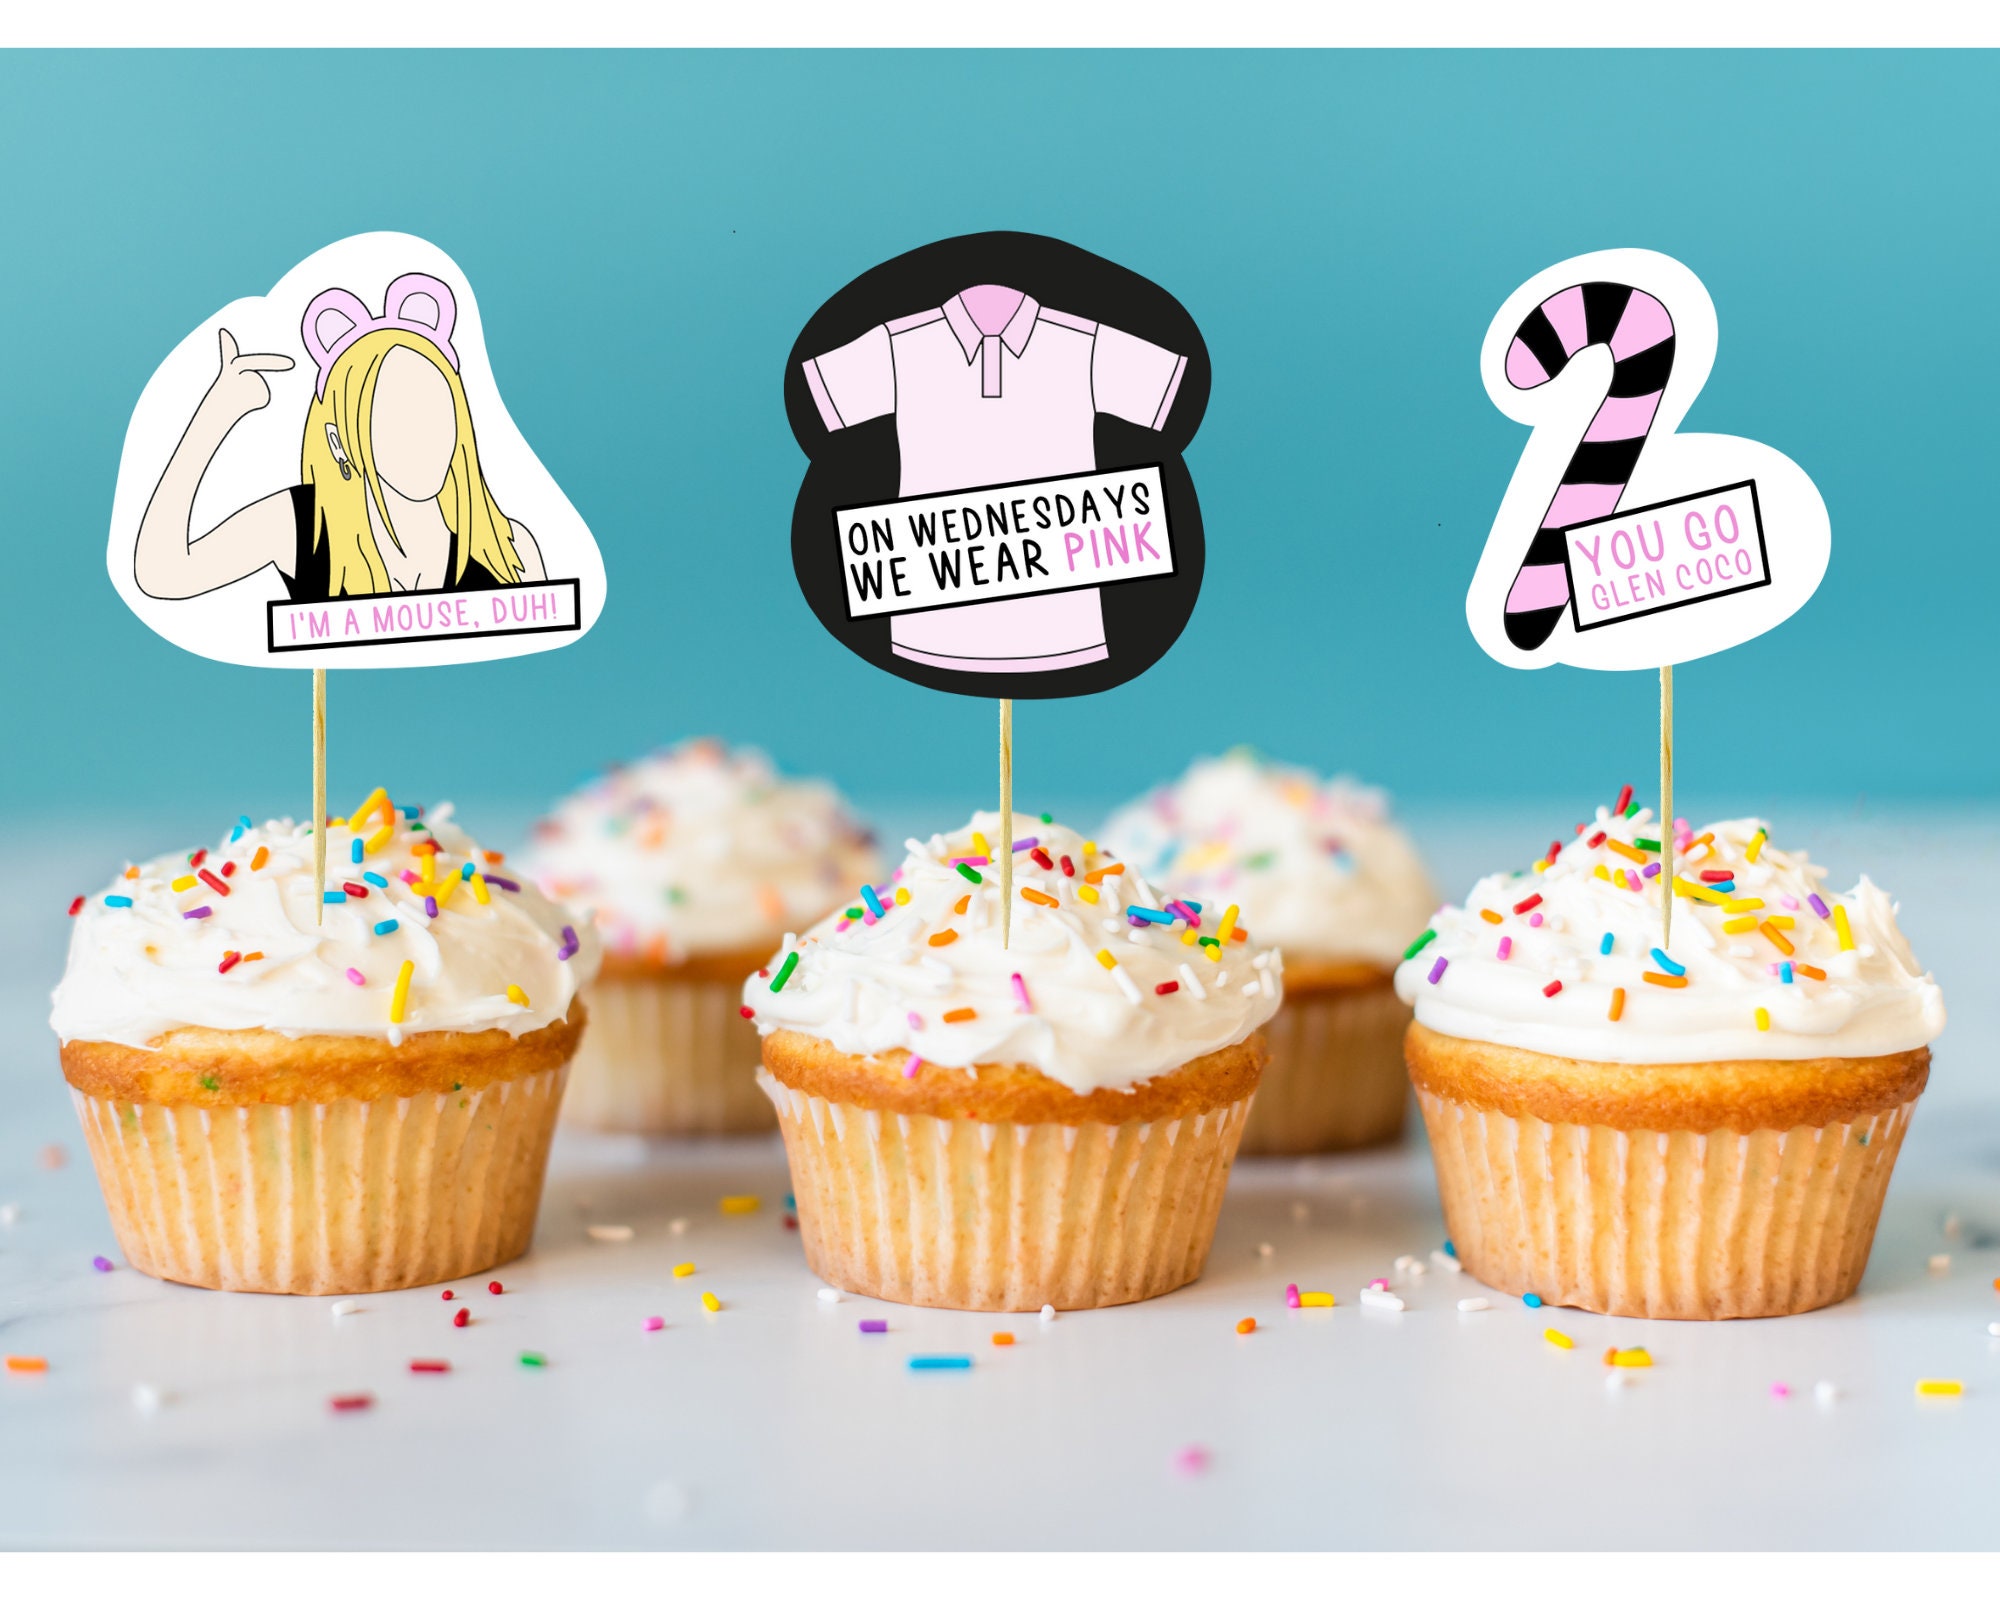 37 PCS Mean Girls Cupcake Toppers for Mean Girls Theme Party Birthday Party  Wedding Baby Shower Fans Party Cake Dessert Decorations Supplies Picks